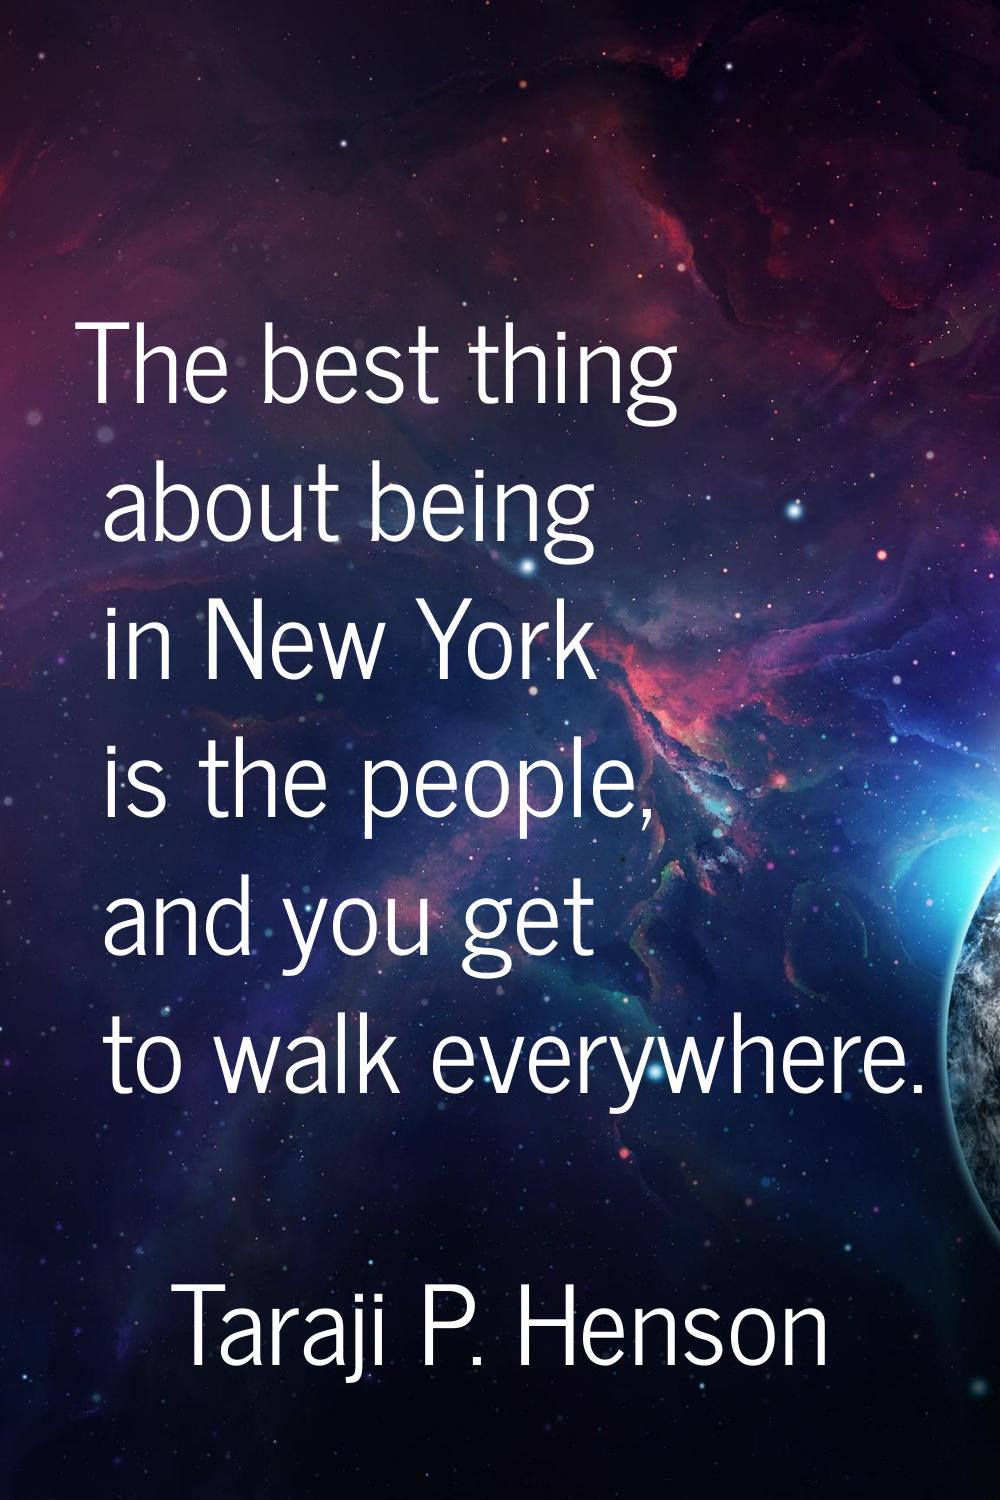 The best thing about being in New York is the people, and you get to walk everywhere.